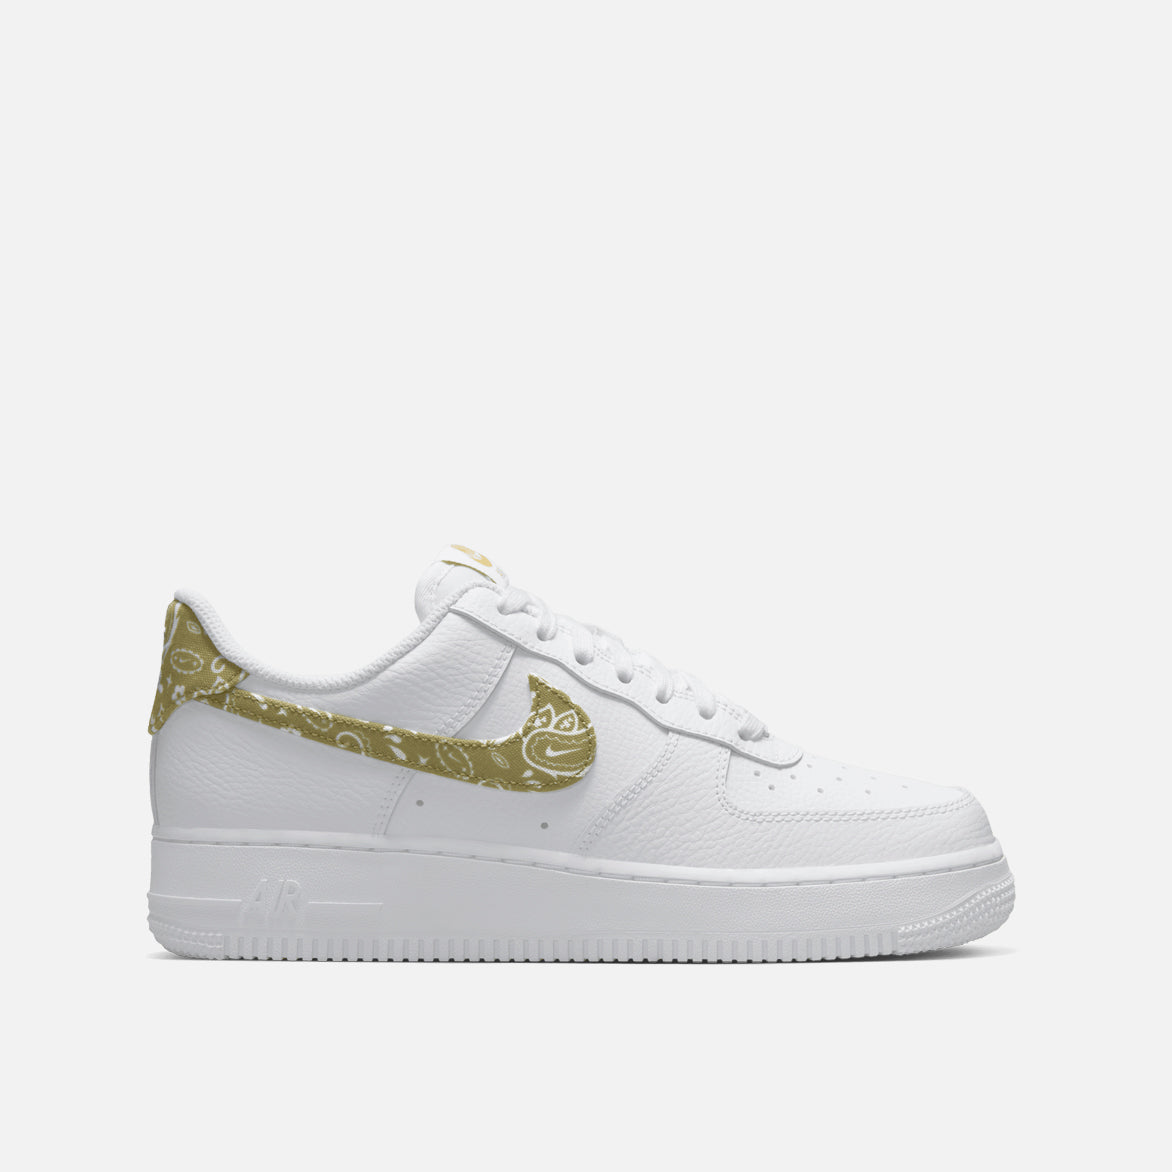 WMNS NIKE AIR FORCE 1 `07 ESS - / Barely lapstoneandhammer.com